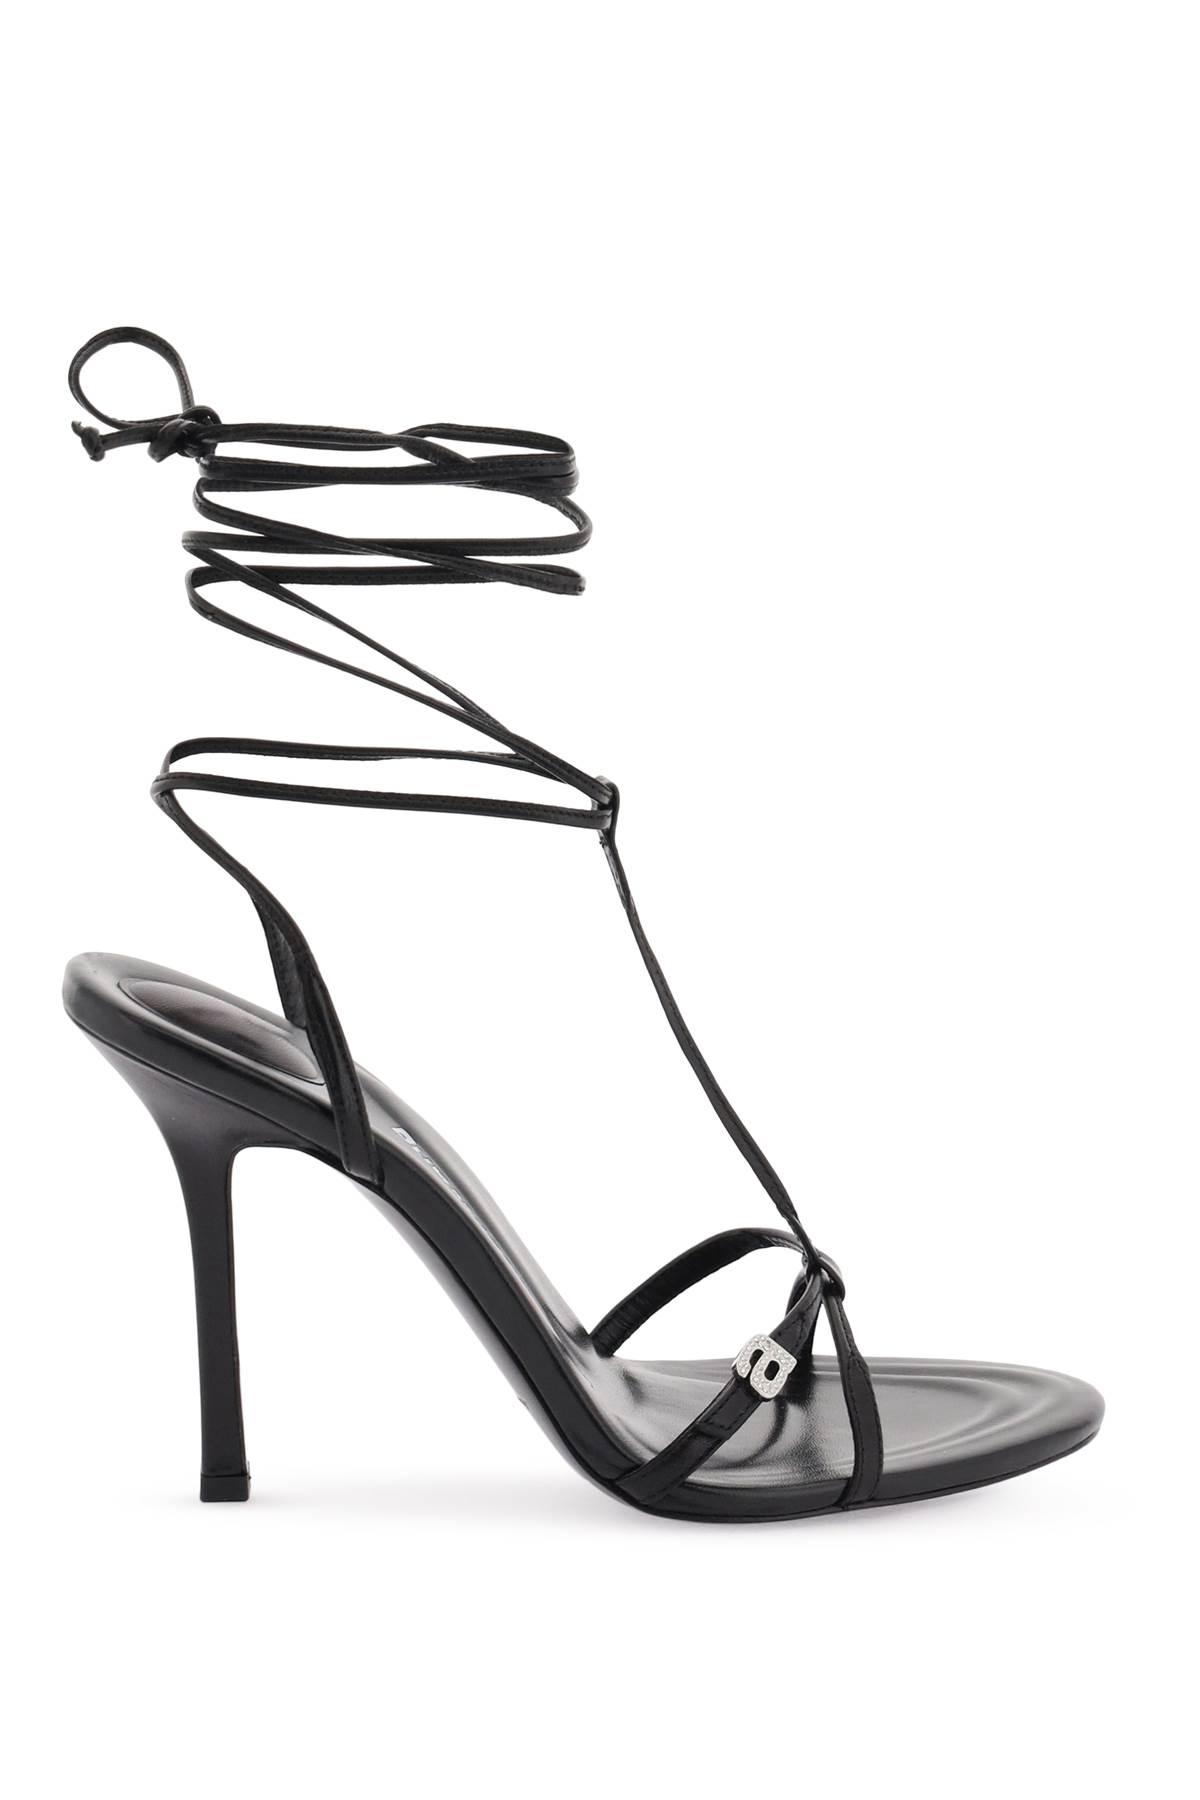 ALEXANDER WANG LUCIENNE LEATHER SANDALS